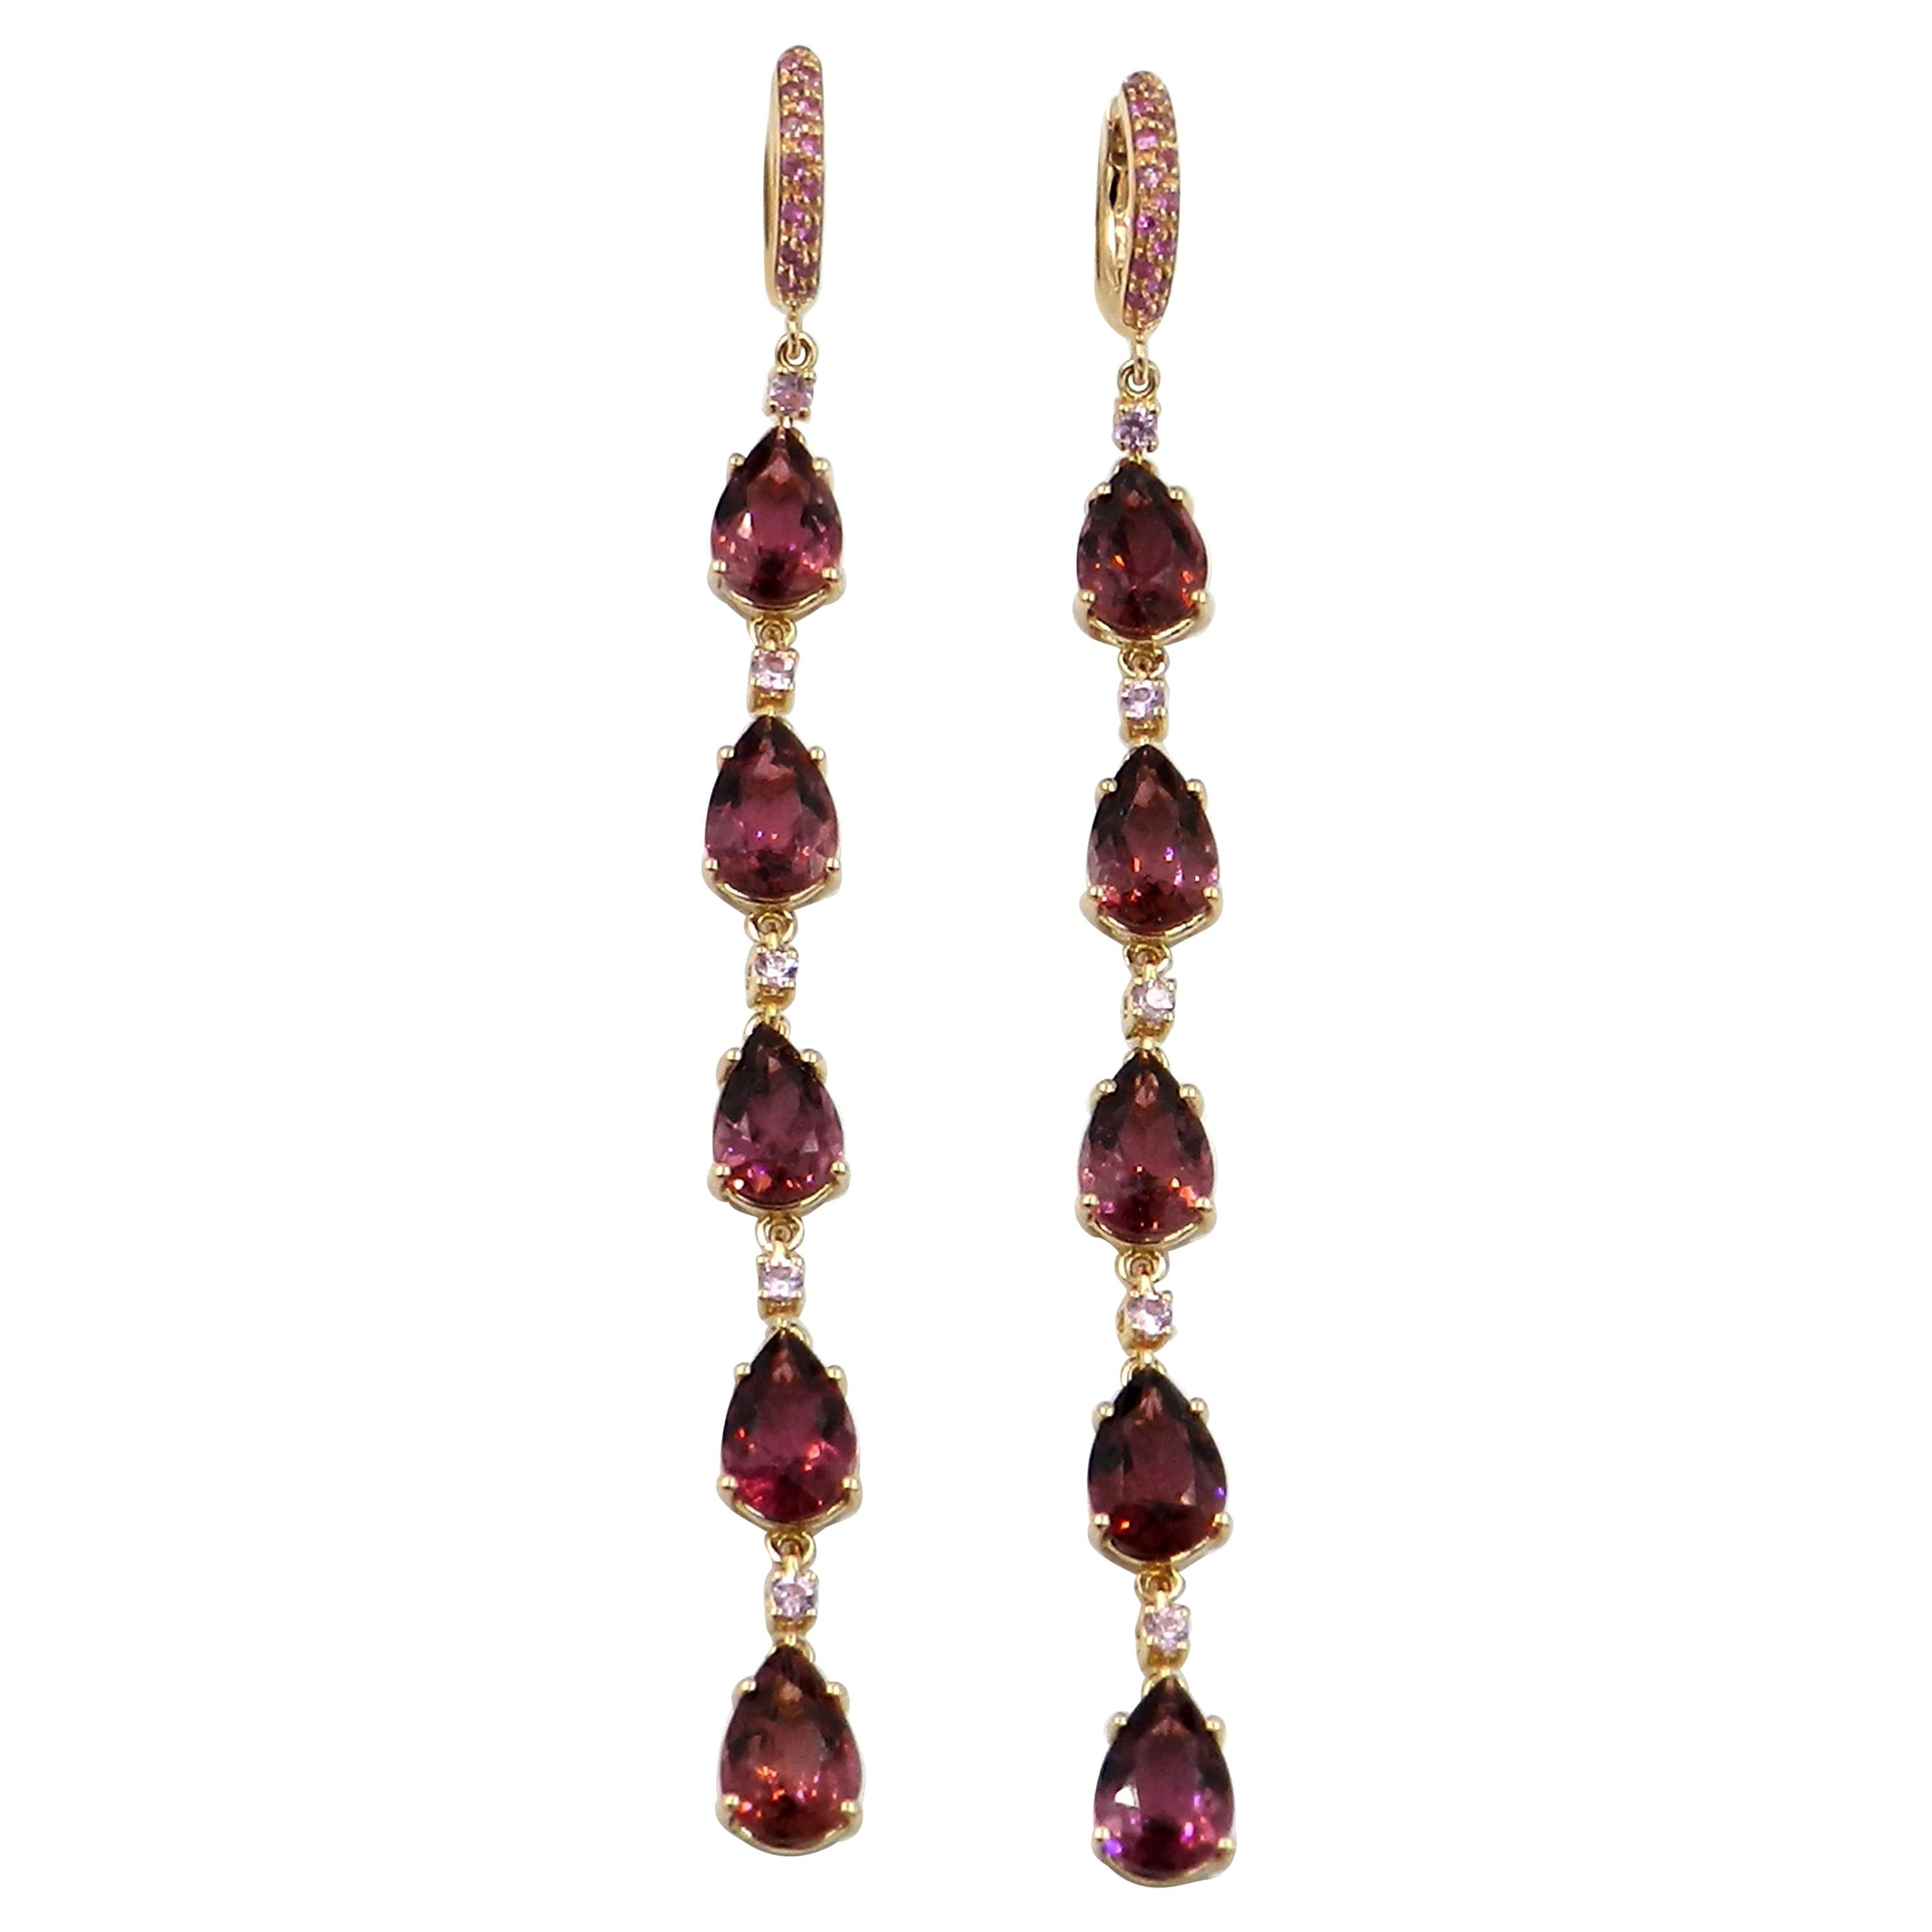 18KT Rose Gold PINK TOURMALINE and PINK SAPPHIRES LONG GARAVELLI EARRINGS 
Lenght mm.90 
GOLD gr : 8,75
PINK SAPPHIRES ct  : 0,64
NATURAL PINK TOURMALINE DROPS ct : 11,50